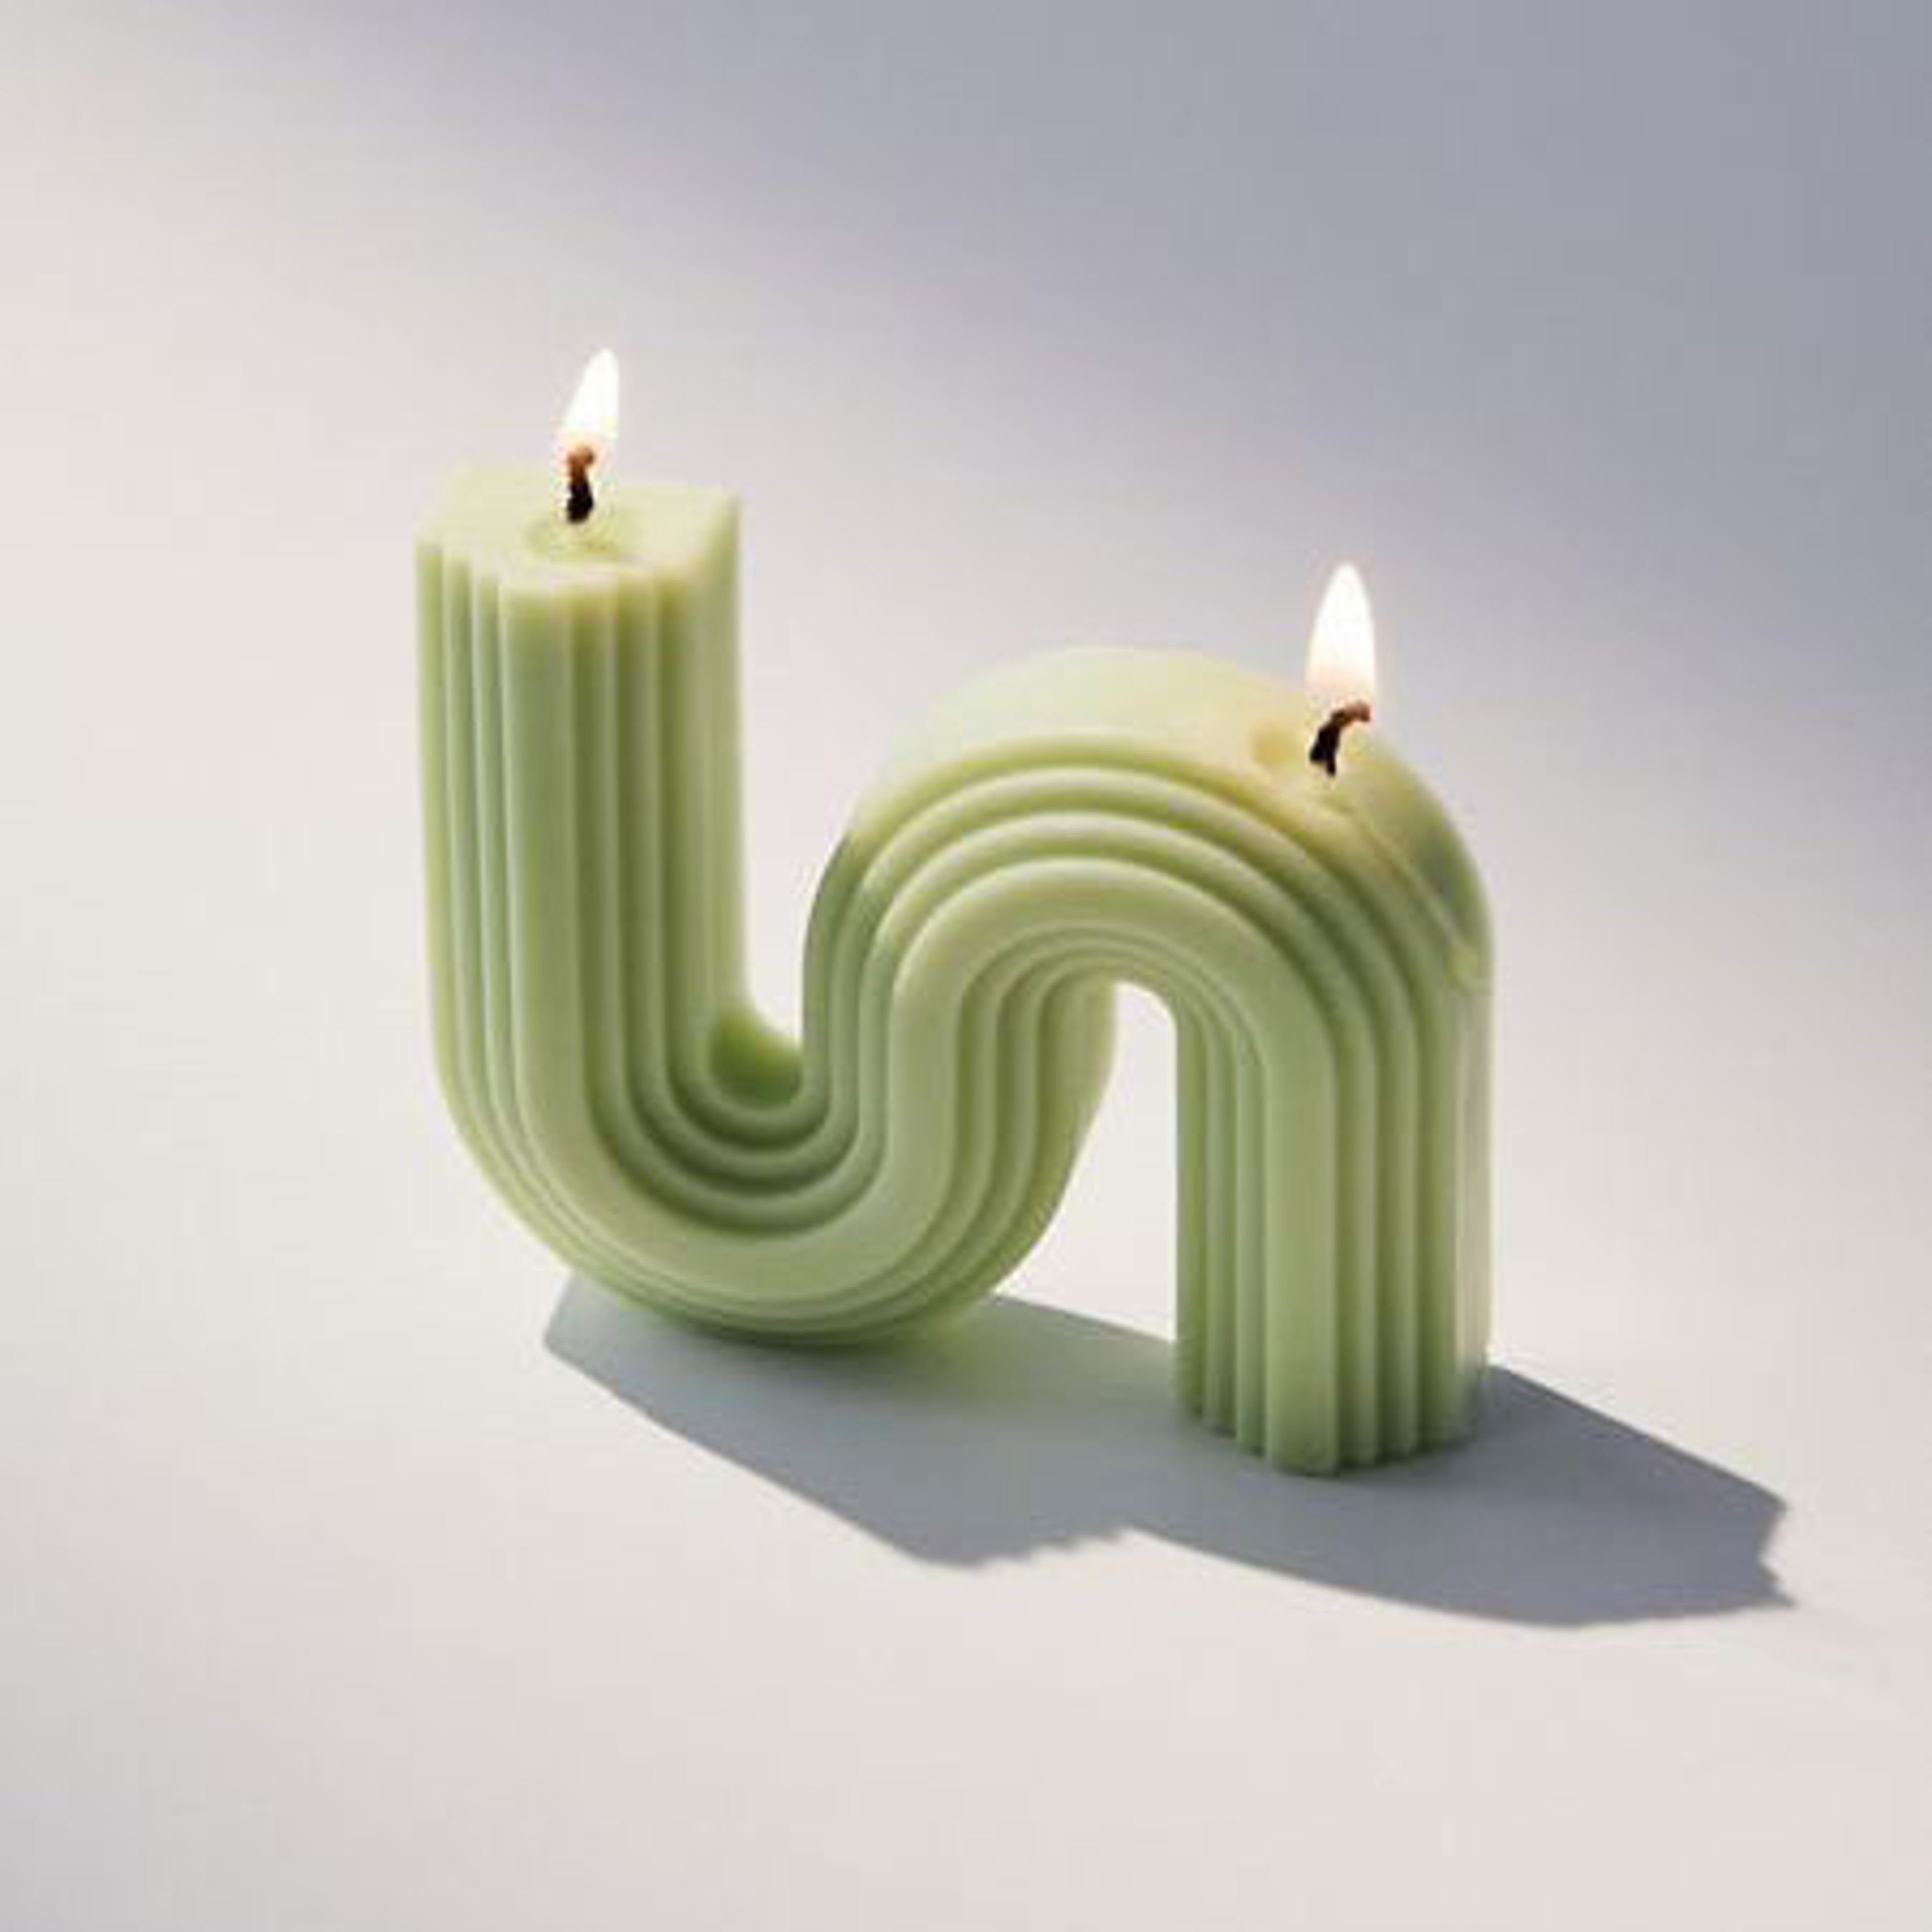 Abstract brothers Unique Shaped Candles │ Kawaii Candle